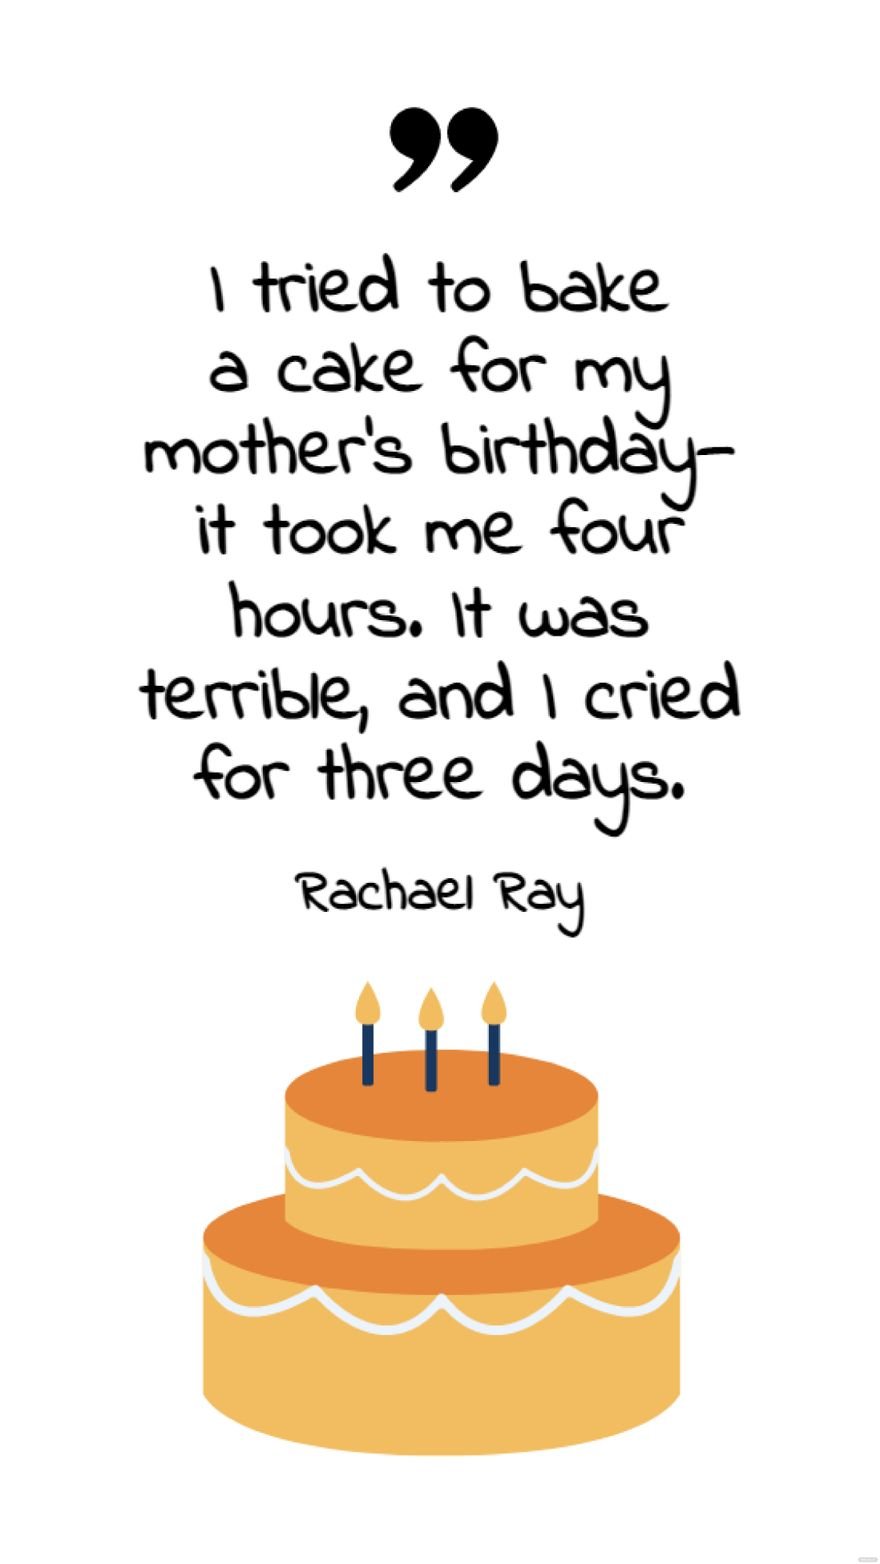 Free Rachael Ray - I tried to bake a cake for my mother's birthday - it took me four hours. It was terrible, and I cried for three days.